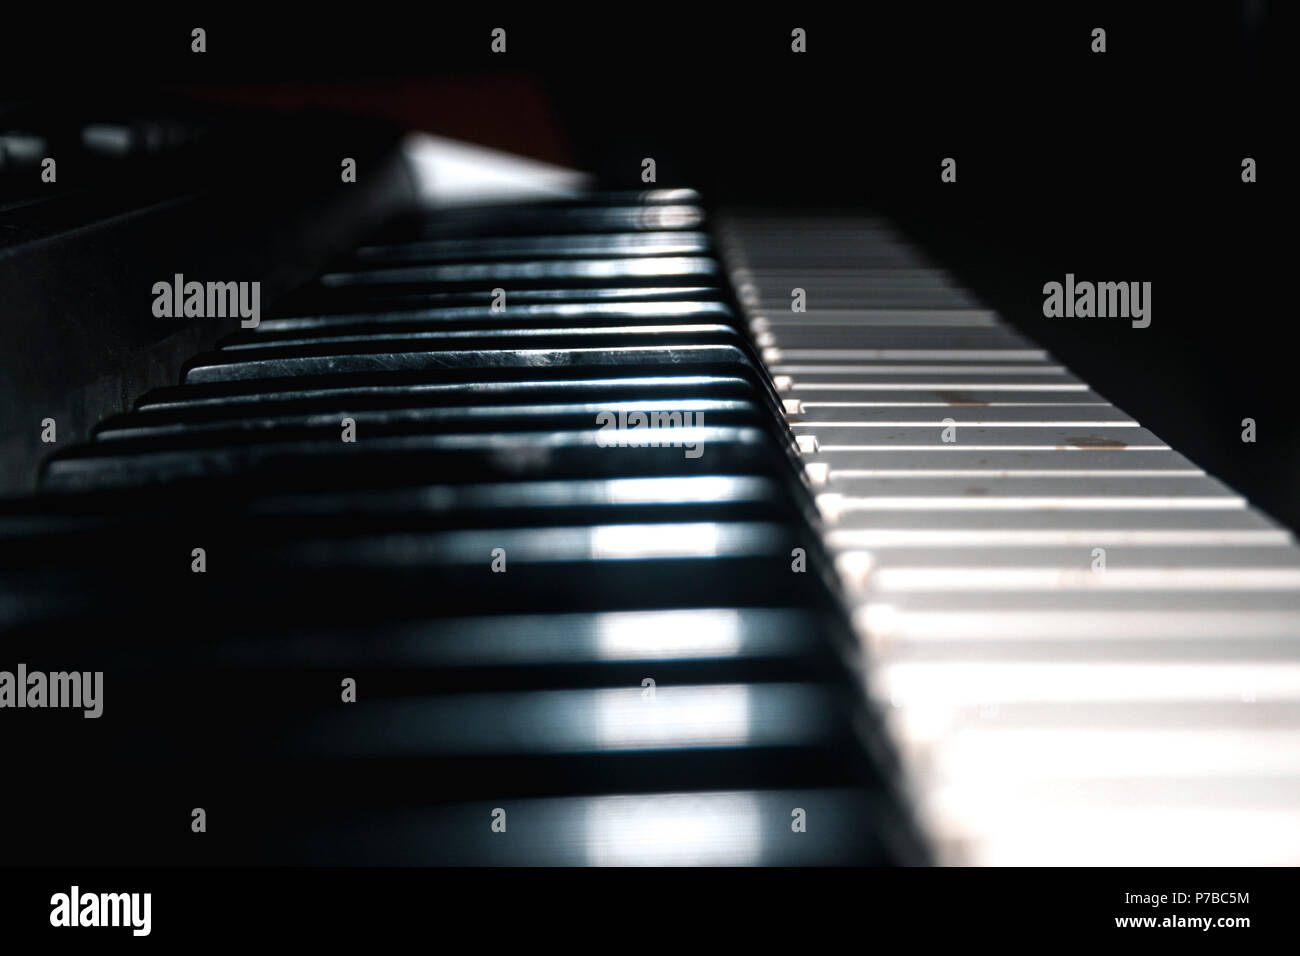 A photo of the keys of a piano Stock Photo